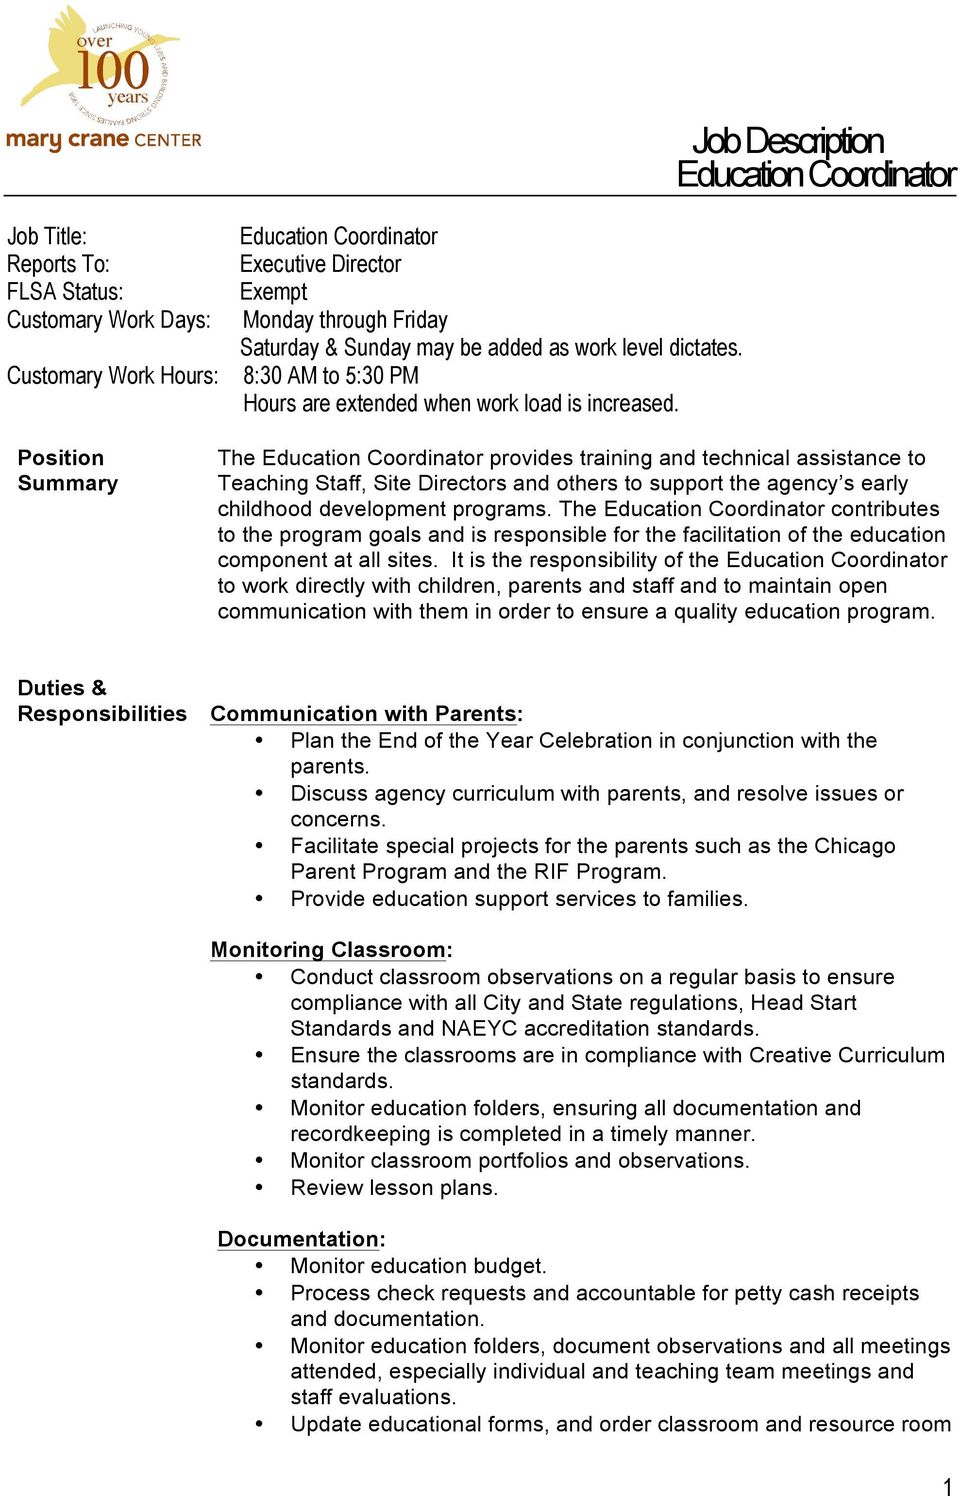 Position Summary The provides training and technical assistance to Teaching Staff, Site Directors and others to support the agency s early childhood development programs.